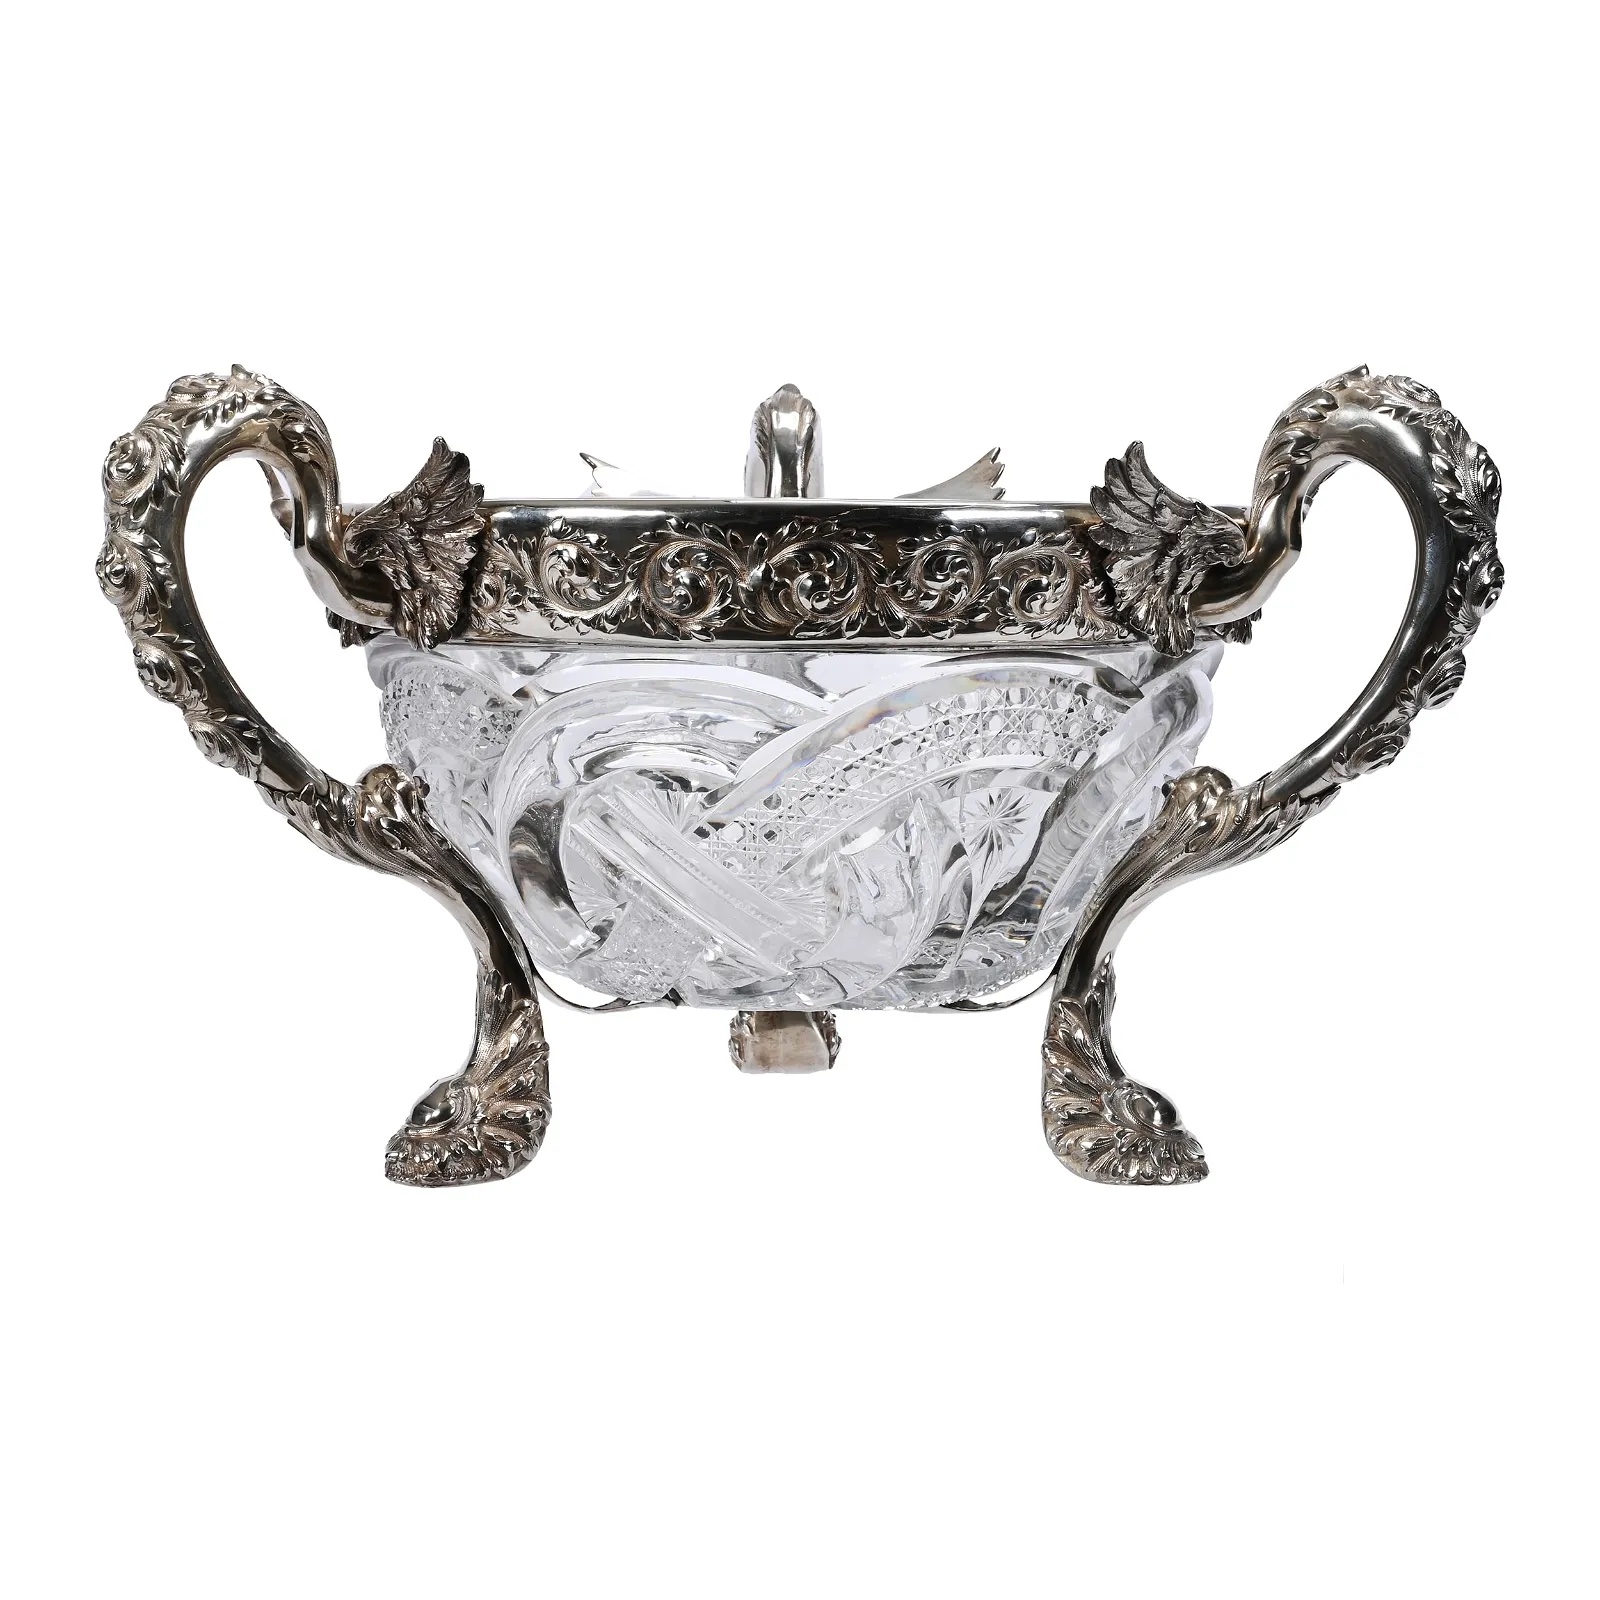 J. Hoare three-handled American brilliant cut glass centerpiece with sterling silver mounts, which sold for $110,000 ($132,000 with buyer's premium) at Woody Auction.